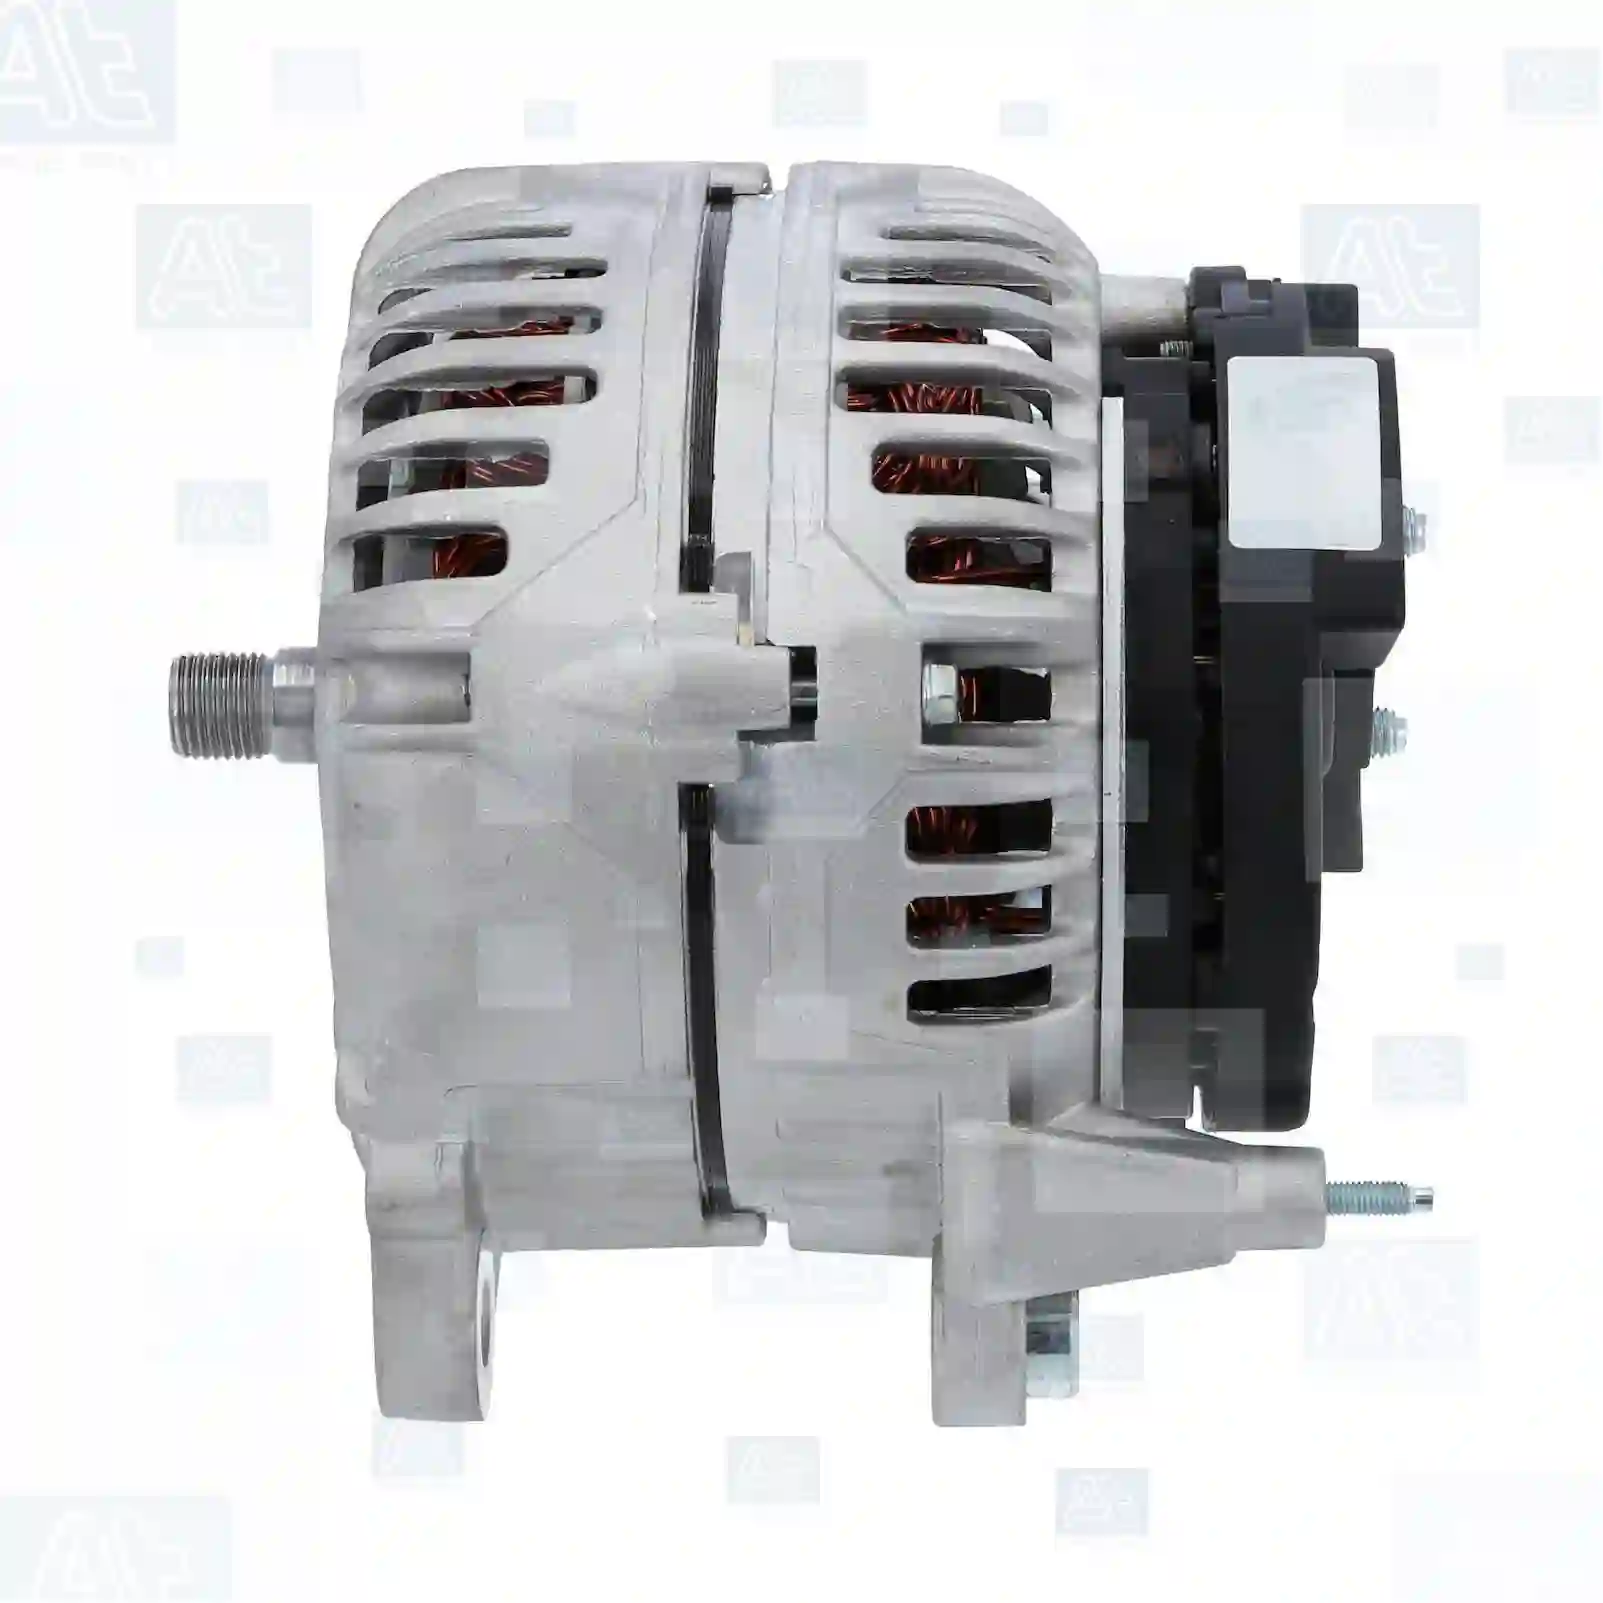 Alternator, without pulley, at no 77711331, oem no: 03L903023F, 06F903023A, 06F903023C, 06F903023F, 06F903023H, 07K903023A, 07K903025A, 304183, 03L903023F, 06F903023C, 06F903023J, 07K903025A, 03L903023F, 06F903023A, 06F903023C, 06F903023F, 06F903023H, 06F903023J, 07K903025A, 38522326F, 03I903023F, 03L903023FX, 06F903023A, 06F903023AX, 06F903023C, 06F903023CX, 06F903023F, 06F903023FX, 06F903023H, 06F903023HX, 06F903023I, 06F903023J, 07K903023A, 07K903025A At Spare Part | Engine, Accelerator Pedal, Camshaft, Connecting Rod, Crankcase, Crankshaft, Cylinder Head, Engine Suspension Mountings, Exhaust Manifold, Exhaust Gas Recirculation, Filter Kits, Flywheel Housing, General Overhaul Kits, Engine, Intake Manifold, Oil Cleaner, Oil Cooler, Oil Filter, Oil Pump, Oil Sump, Piston & Liner, Sensor & Switch, Timing Case, Turbocharger, Cooling System, Belt Tensioner, Coolant Filter, Coolant Pipe, Corrosion Prevention Agent, Drive, Expansion Tank, Fan, Intercooler, Monitors & Gauges, Radiator, Thermostat, V-Belt / Timing belt, Water Pump, Fuel System, Electronical Injector Unit, Feed Pump, Fuel Filter, cpl., Fuel Gauge Sender,  Fuel Line, Fuel Pump, Fuel Tank, Injection Line Kit, Injection Pump, Exhaust System, Clutch & Pedal, Gearbox, Propeller Shaft, Axles, Brake System, Hubs & Wheels, Suspension, Leaf Spring, Universal Parts / Accessories, Steering, Electrical System, Cabin Alternator, without pulley, at no 77711331, oem no: 03L903023F, 06F903023A, 06F903023C, 06F903023F, 06F903023H, 07K903023A, 07K903025A, 304183, 03L903023F, 06F903023C, 06F903023J, 07K903025A, 03L903023F, 06F903023A, 06F903023C, 06F903023F, 06F903023H, 06F903023J, 07K903025A, 38522326F, 03I903023F, 03L903023FX, 06F903023A, 06F903023AX, 06F903023C, 06F903023CX, 06F903023F, 06F903023FX, 06F903023H, 06F903023HX, 06F903023I, 06F903023J, 07K903023A, 07K903025A At Spare Part | Engine, Accelerator Pedal, Camshaft, Connecting Rod, Crankcase, Crankshaft, Cylinder Head, Engine Suspension Mountings, Exhaust Manifold, Exhaust Gas Recirculation, Filter Kits, Flywheel Housing, General Overhaul Kits, Engine, Intake Manifold, Oil Cleaner, Oil Cooler, Oil Filter, Oil Pump, Oil Sump, Piston & Liner, Sensor & Switch, Timing Case, Turbocharger, Cooling System, Belt Tensioner, Coolant Filter, Coolant Pipe, Corrosion Prevention Agent, Drive, Expansion Tank, Fan, Intercooler, Monitors & Gauges, Radiator, Thermostat, V-Belt / Timing belt, Water Pump, Fuel System, Electronical Injector Unit, Feed Pump, Fuel Filter, cpl., Fuel Gauge Sender,  Fuel Line, Fuel Pump, Fuel Tank, Injection Line Kit, Injection Pump, Exhaust System, Clutch & Pedal, Gearbox, Propeller Shaft, Axles, Brake System, Hubs & Wheels, Suspension, Leaf Spring, Universal Parts / Accessories, Steering, Electrical System, Cabin